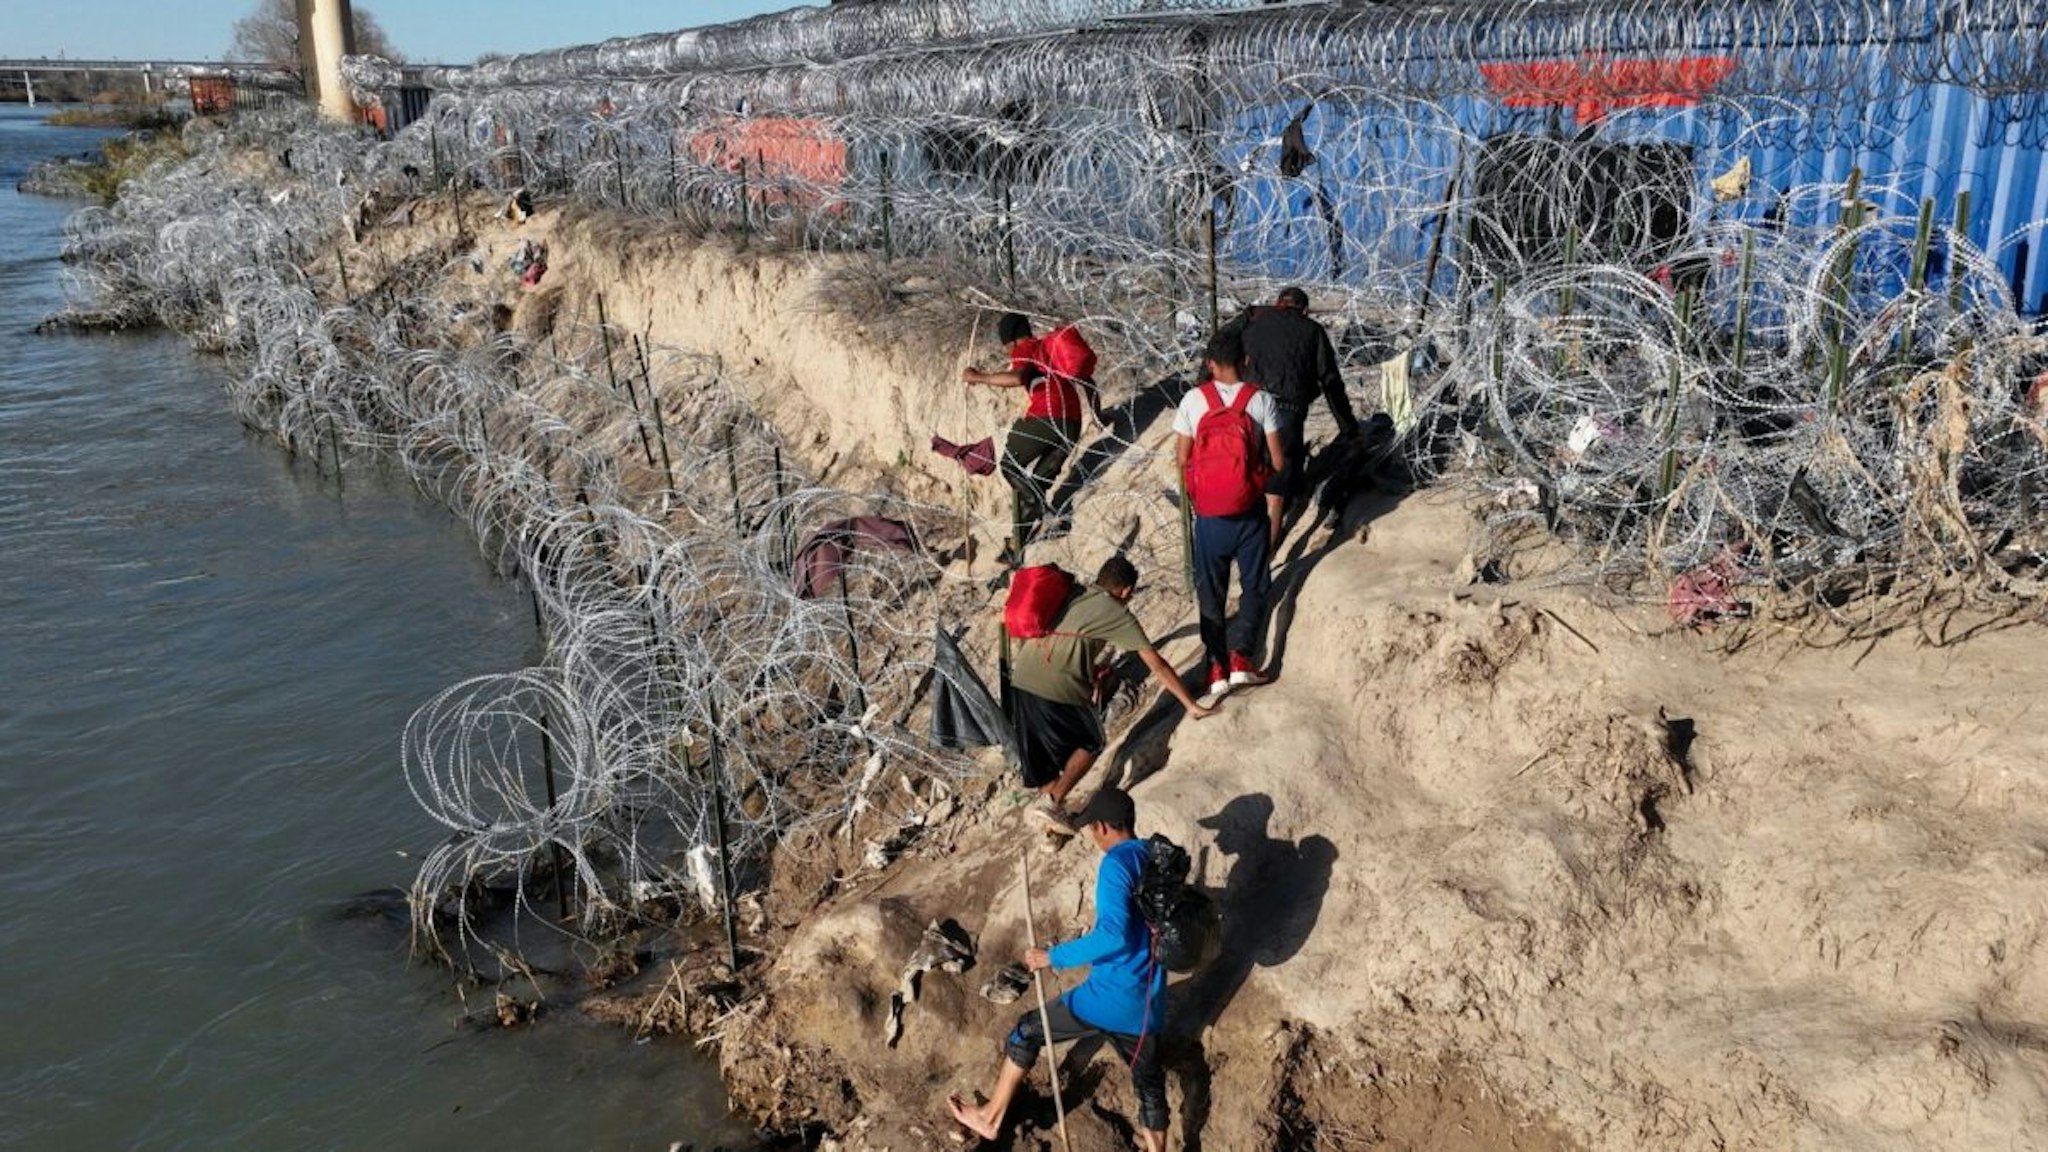 EAGLE PASS, TEXAS - FEBRUARY 03: An aerial view shows an immigrant group trying to cross the Texan border despite heightened security measures in Eagle Pass, Texas on February 03, 2024.